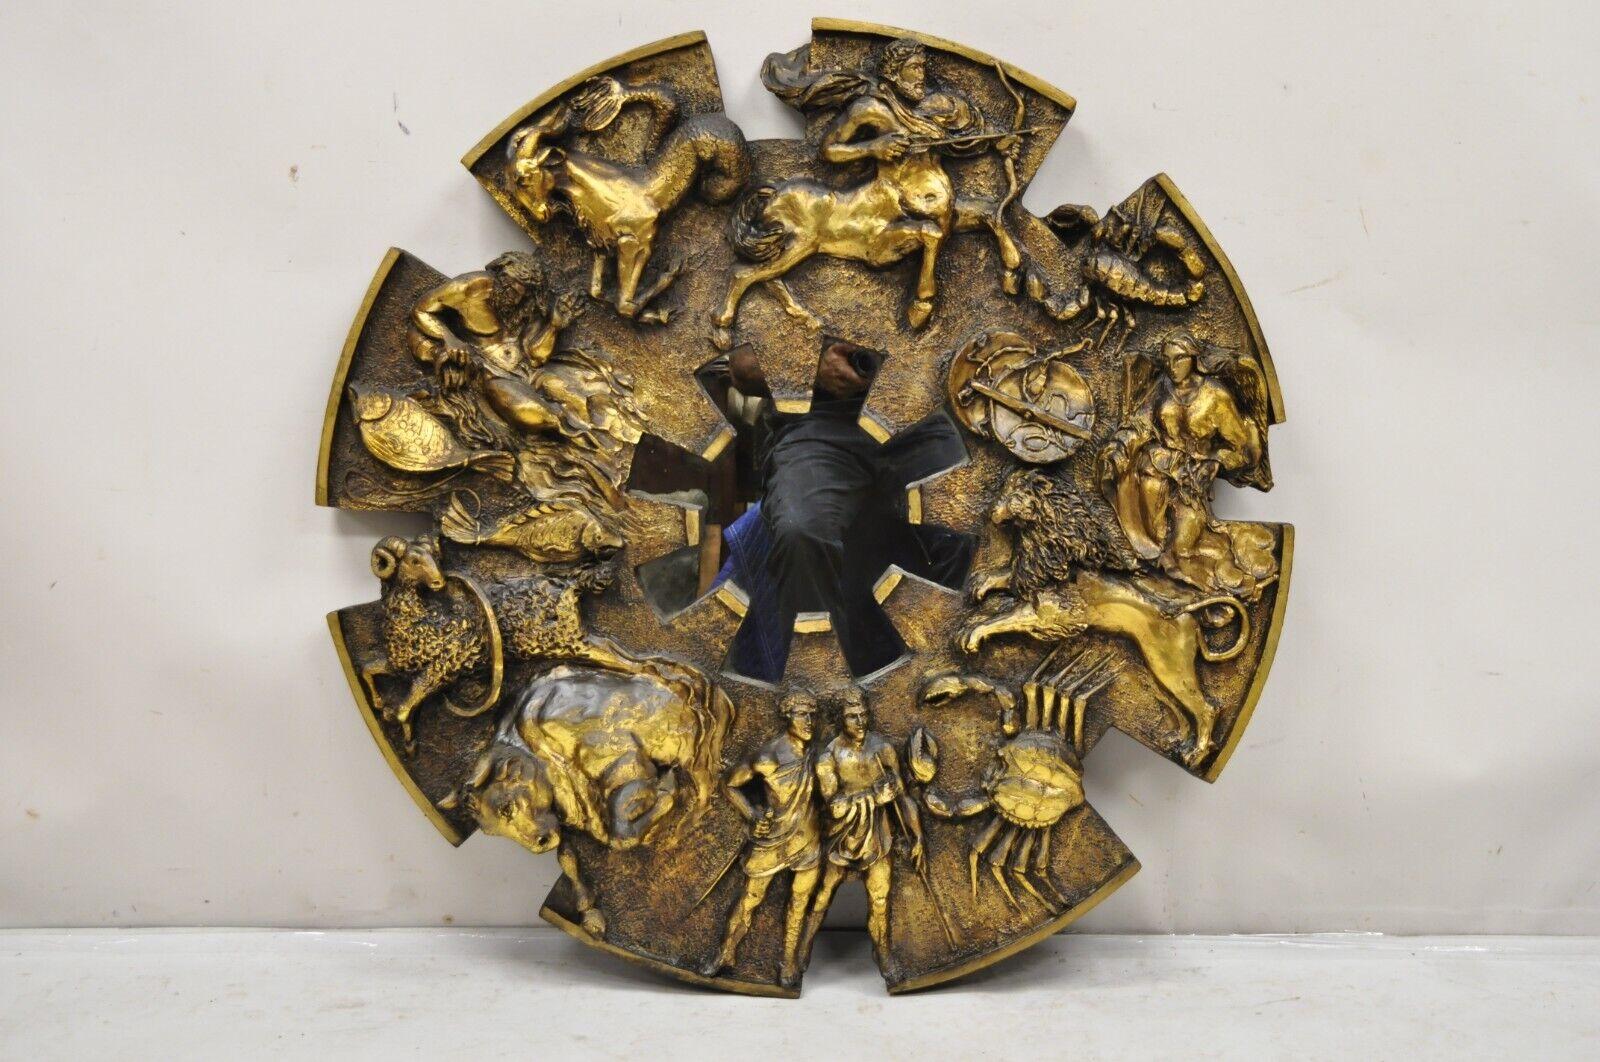 Vintage Finesse Originals 3D Fiberglass Zodiac Signs Mid Century Wall Mirror. Item features is distressed gold finish, 